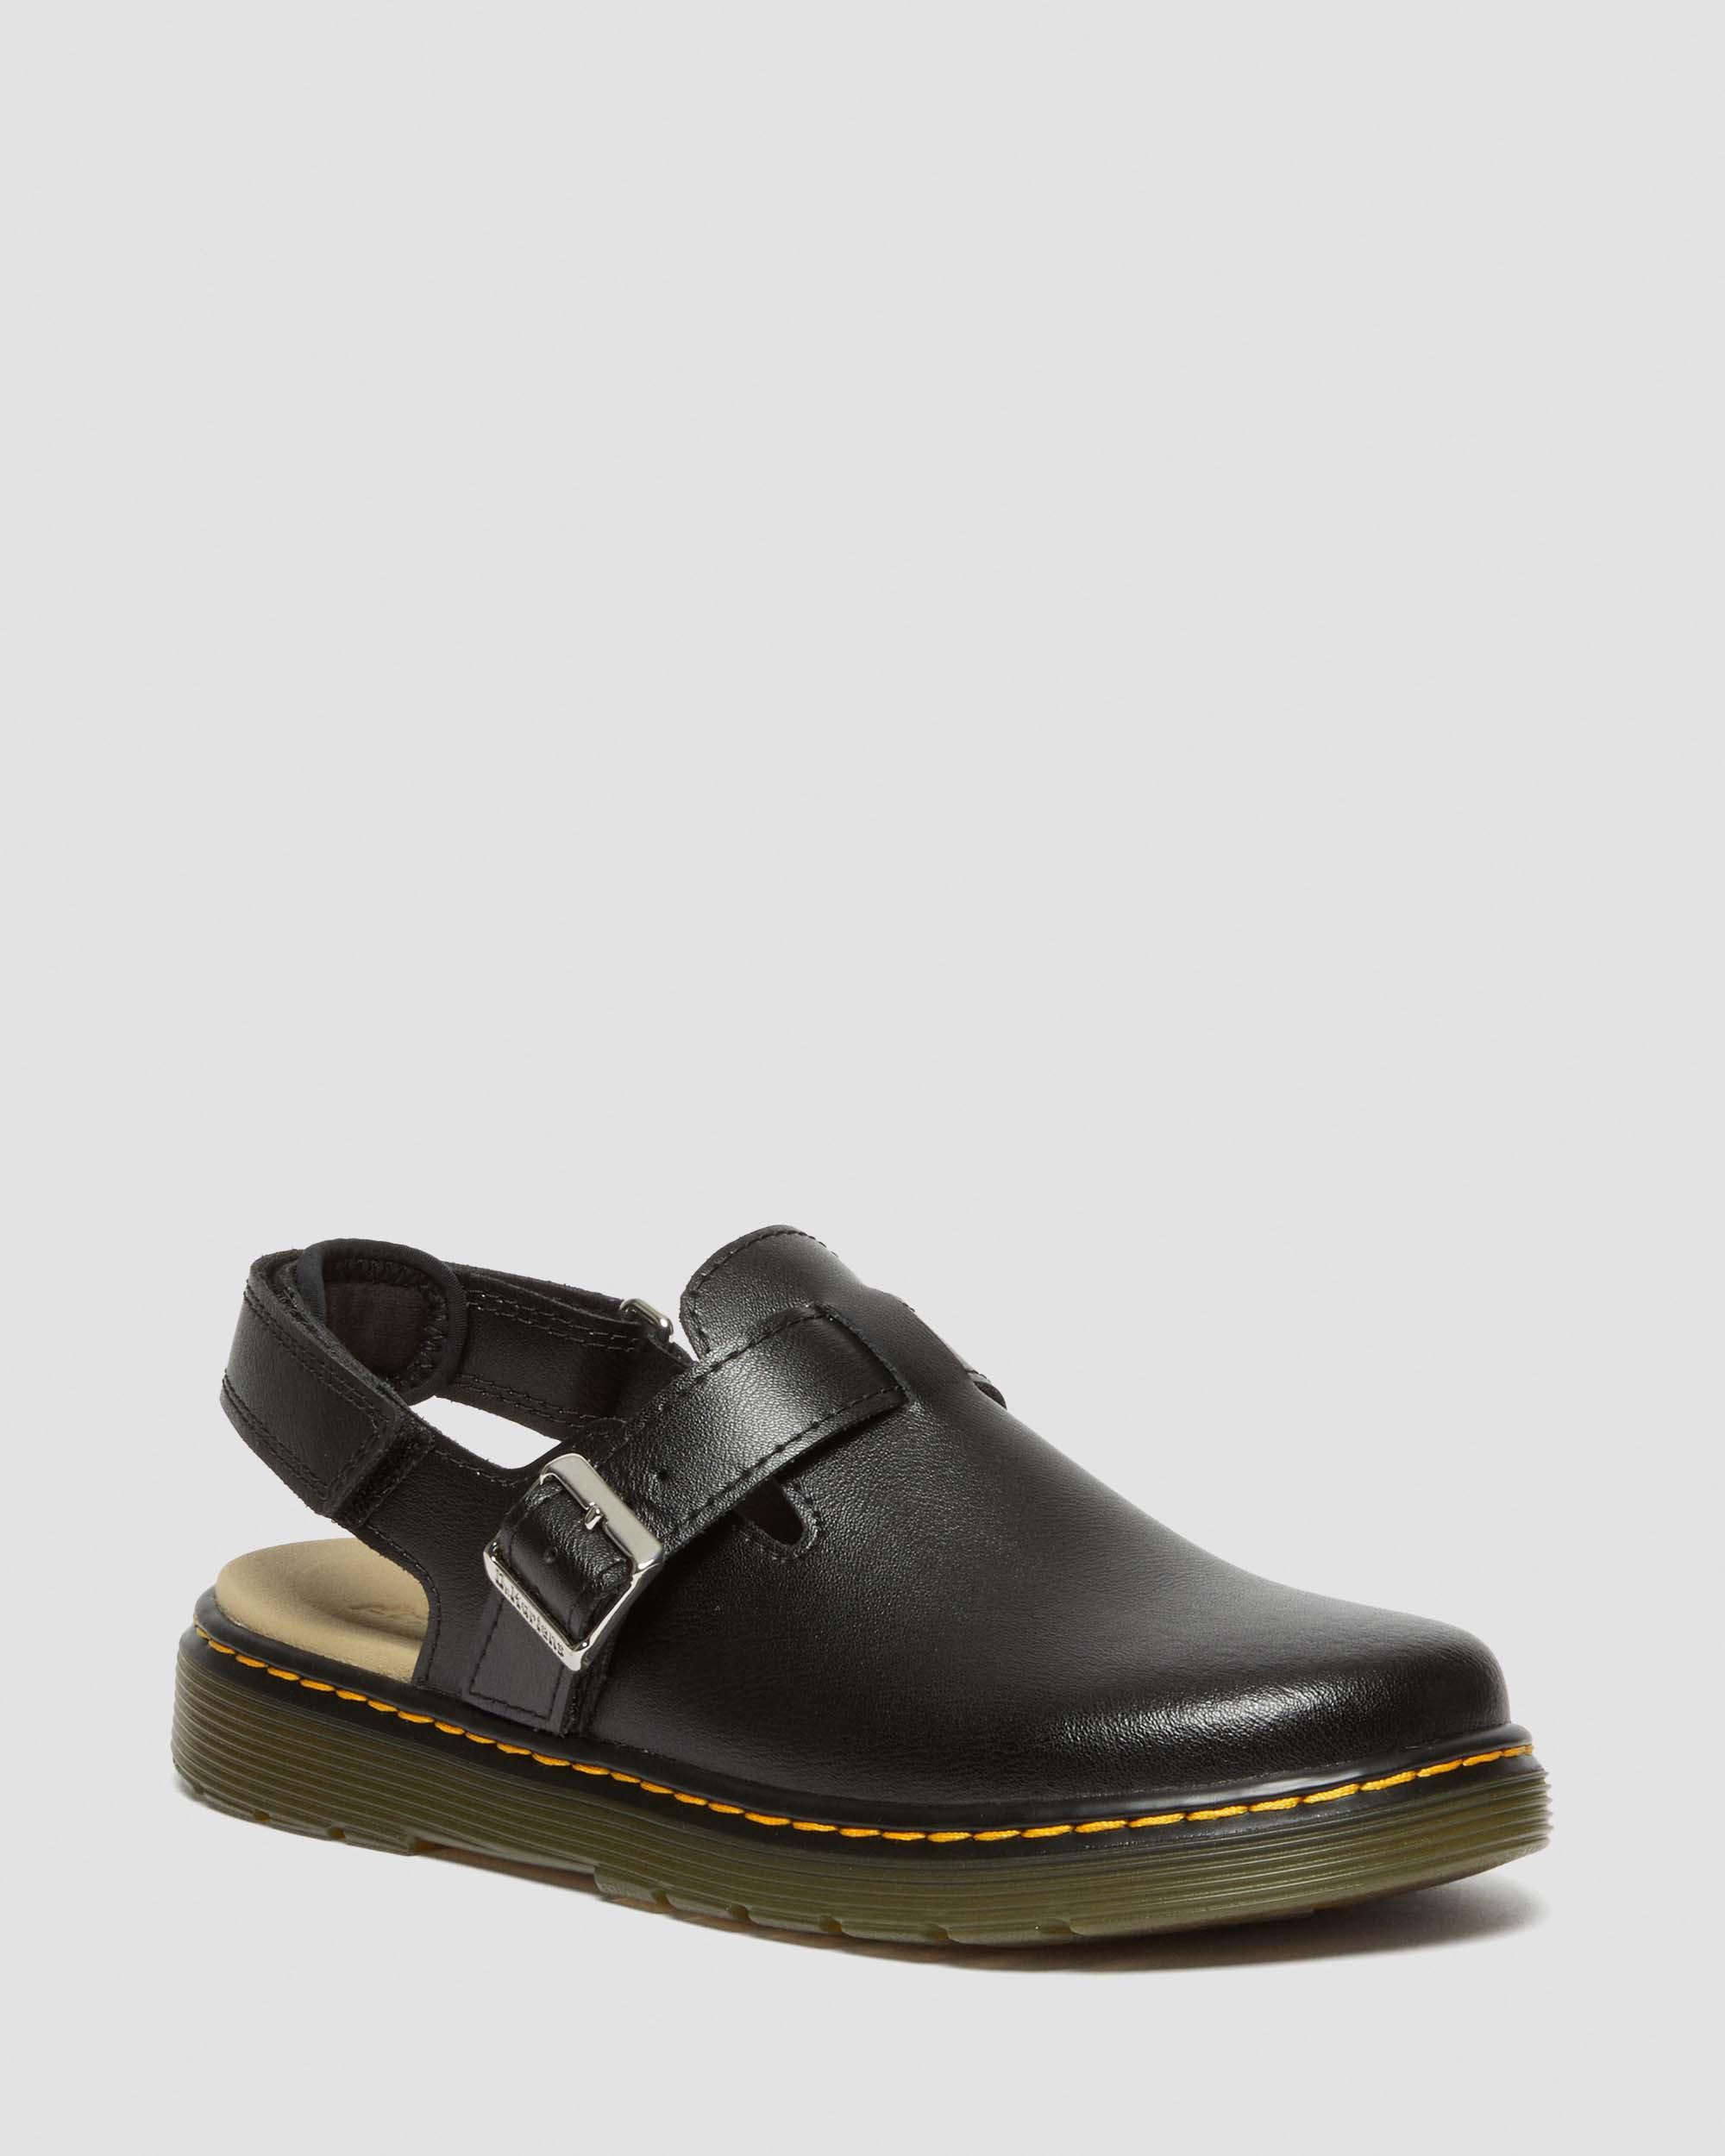 Youth 8065 Softy T Leather Mary Jane Shoes in Black | Dr. Martens